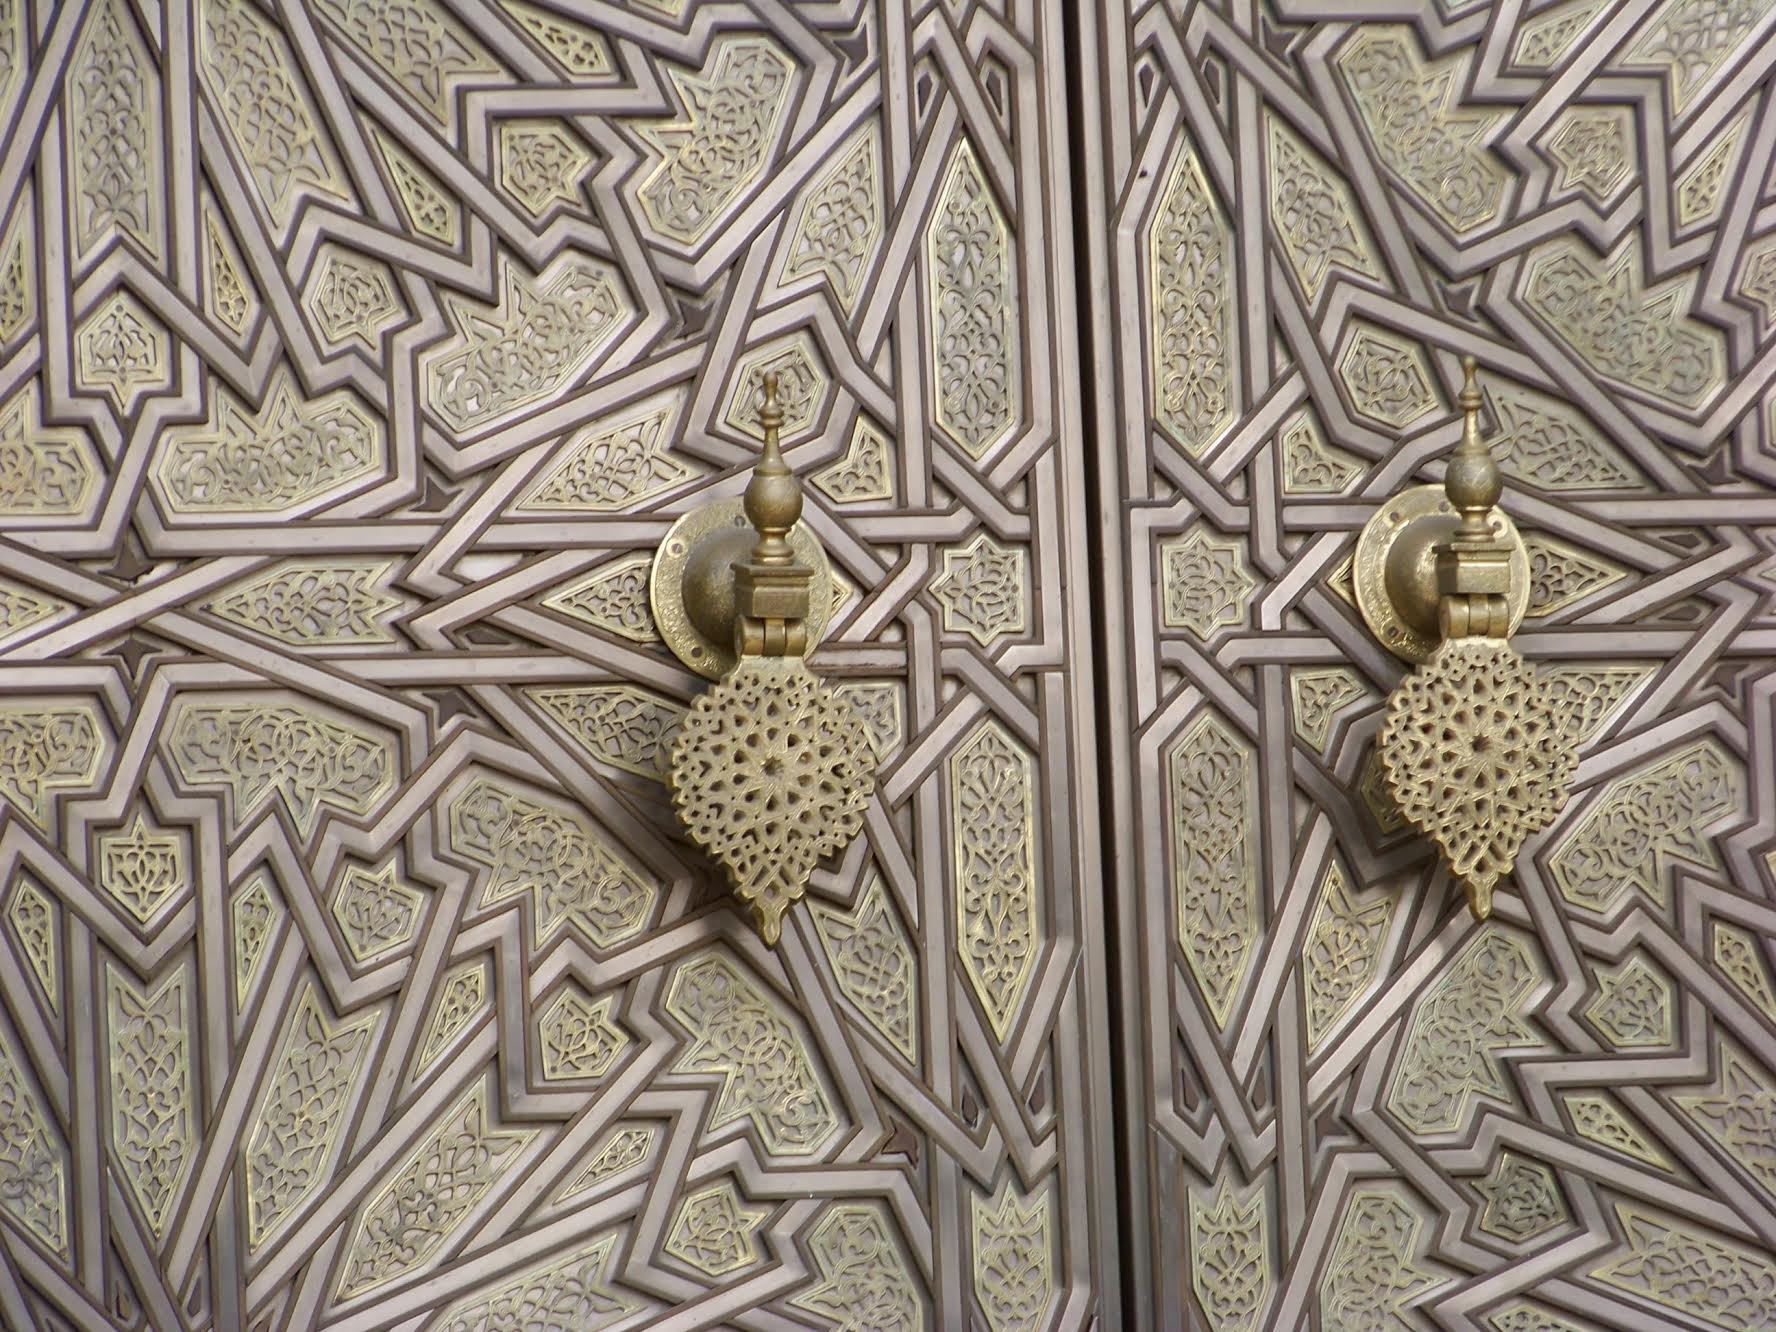     Photo by Celene BarreraPerfect set of patterns - door handles at the Moroccan president's palace in Casablanca.&nbsp; 